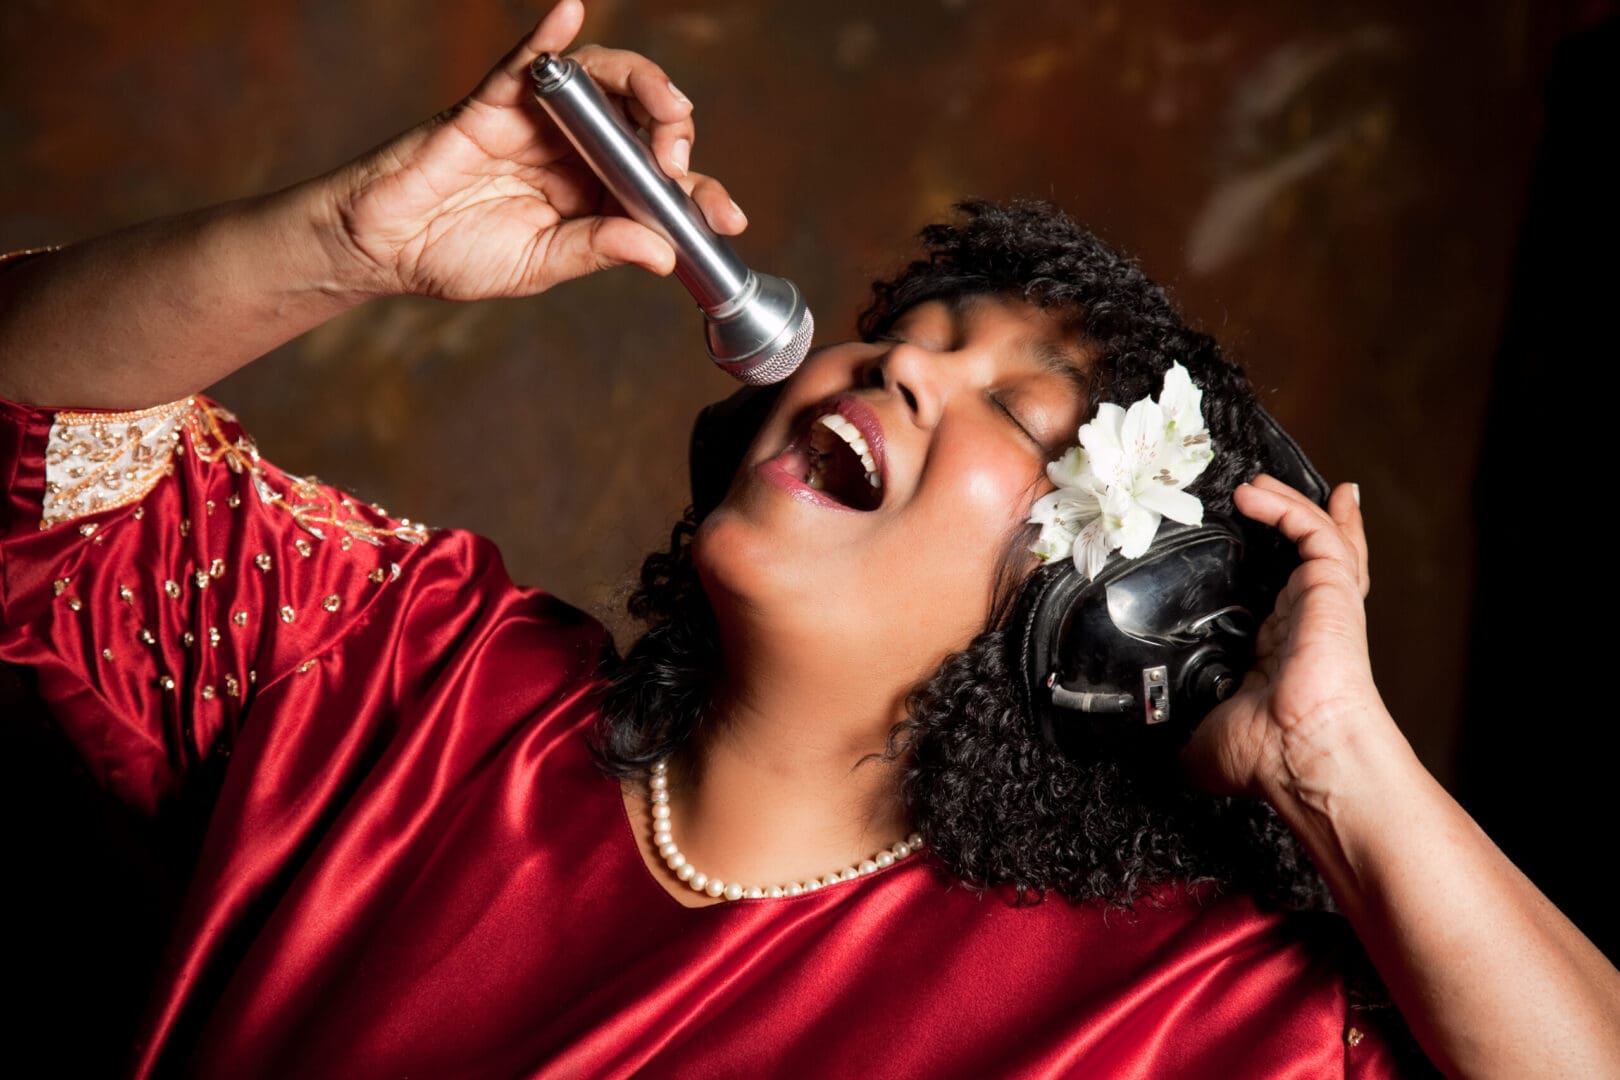 A woman singing into a microphone with her eyes closed.